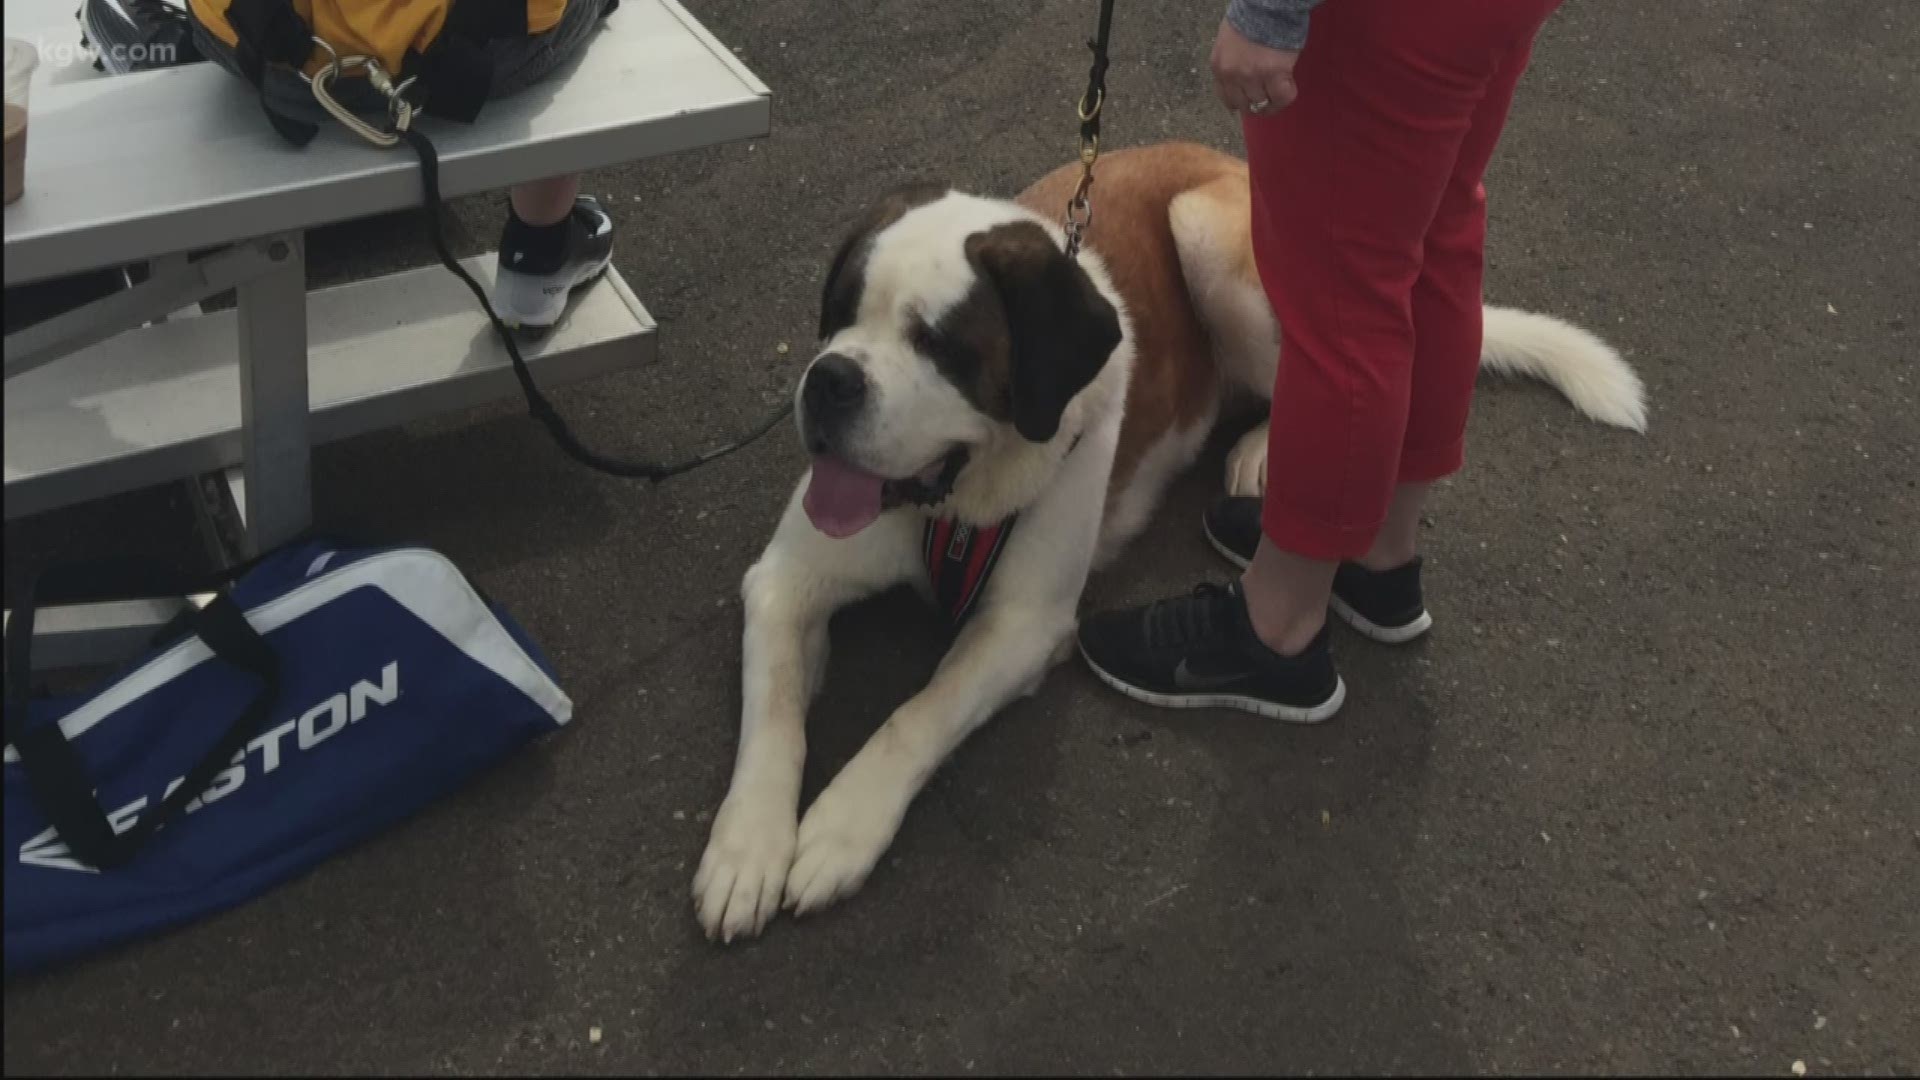 A local family is raising money to get their 12-year-old son what’s called an autism anchoring dog, a special service dog that helps keep children with autism safe and calm.